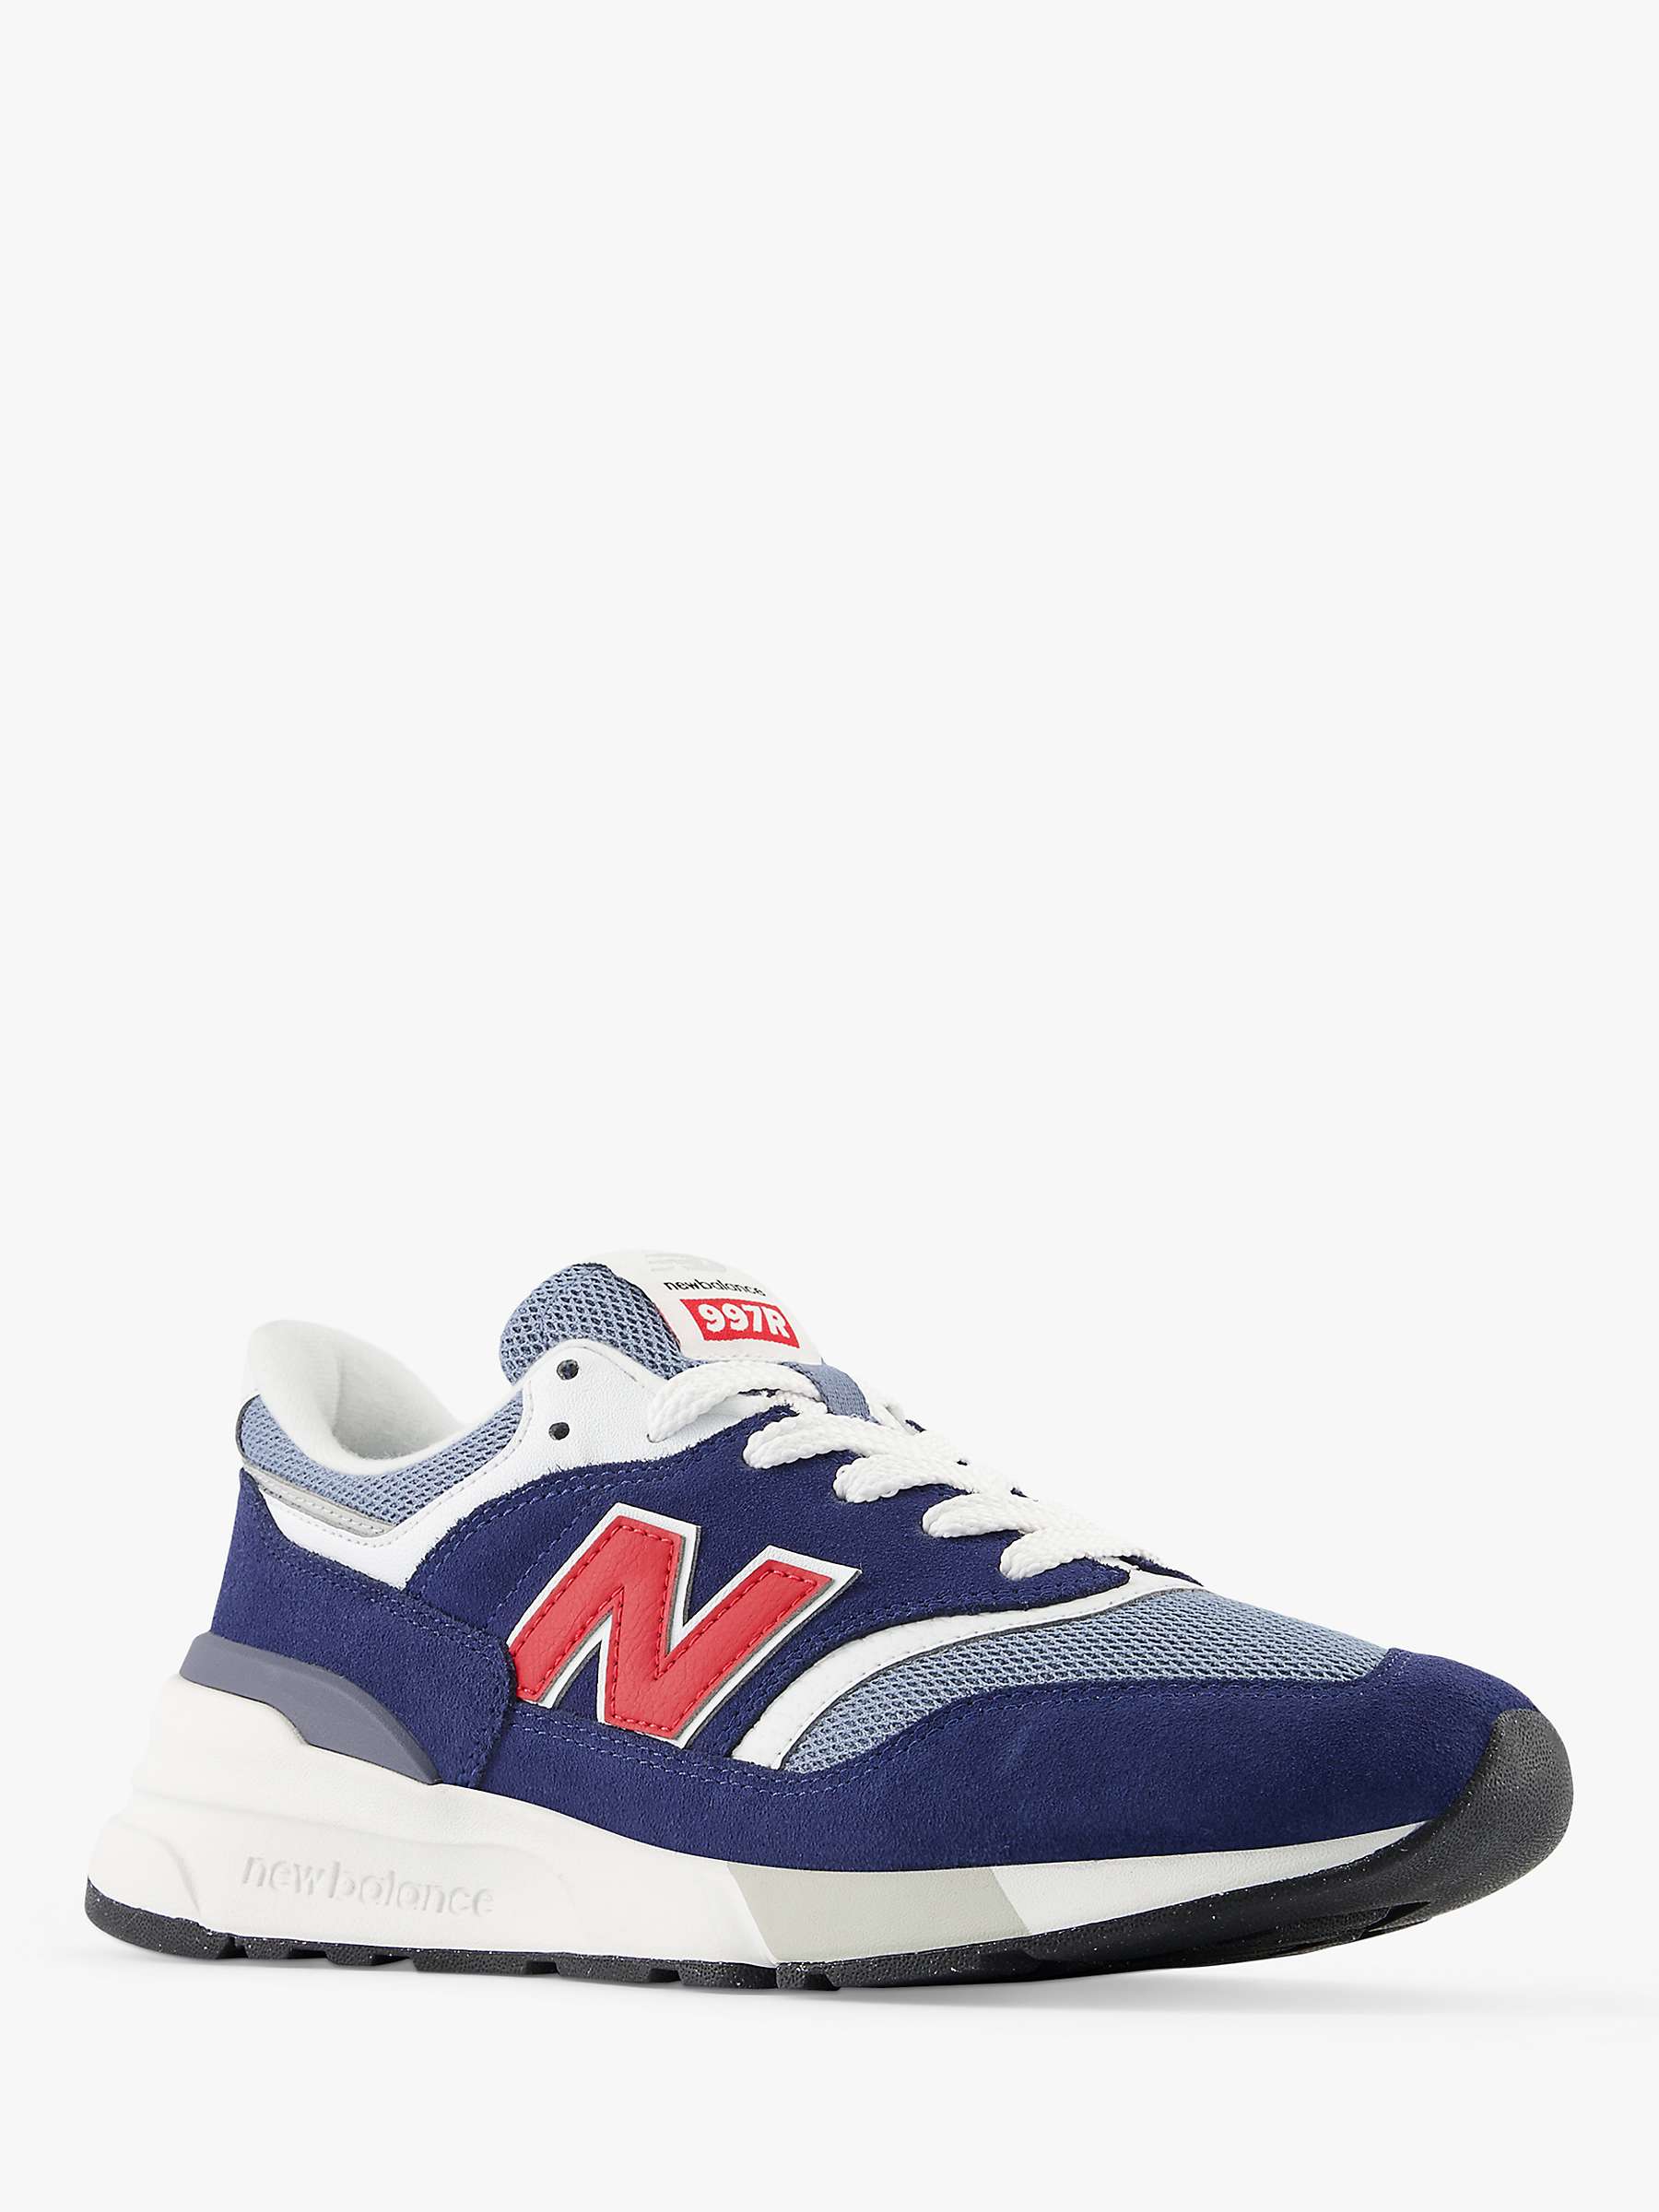 Buy New Balance 997R Suede Mesh Trainers Online at johnlewis.com